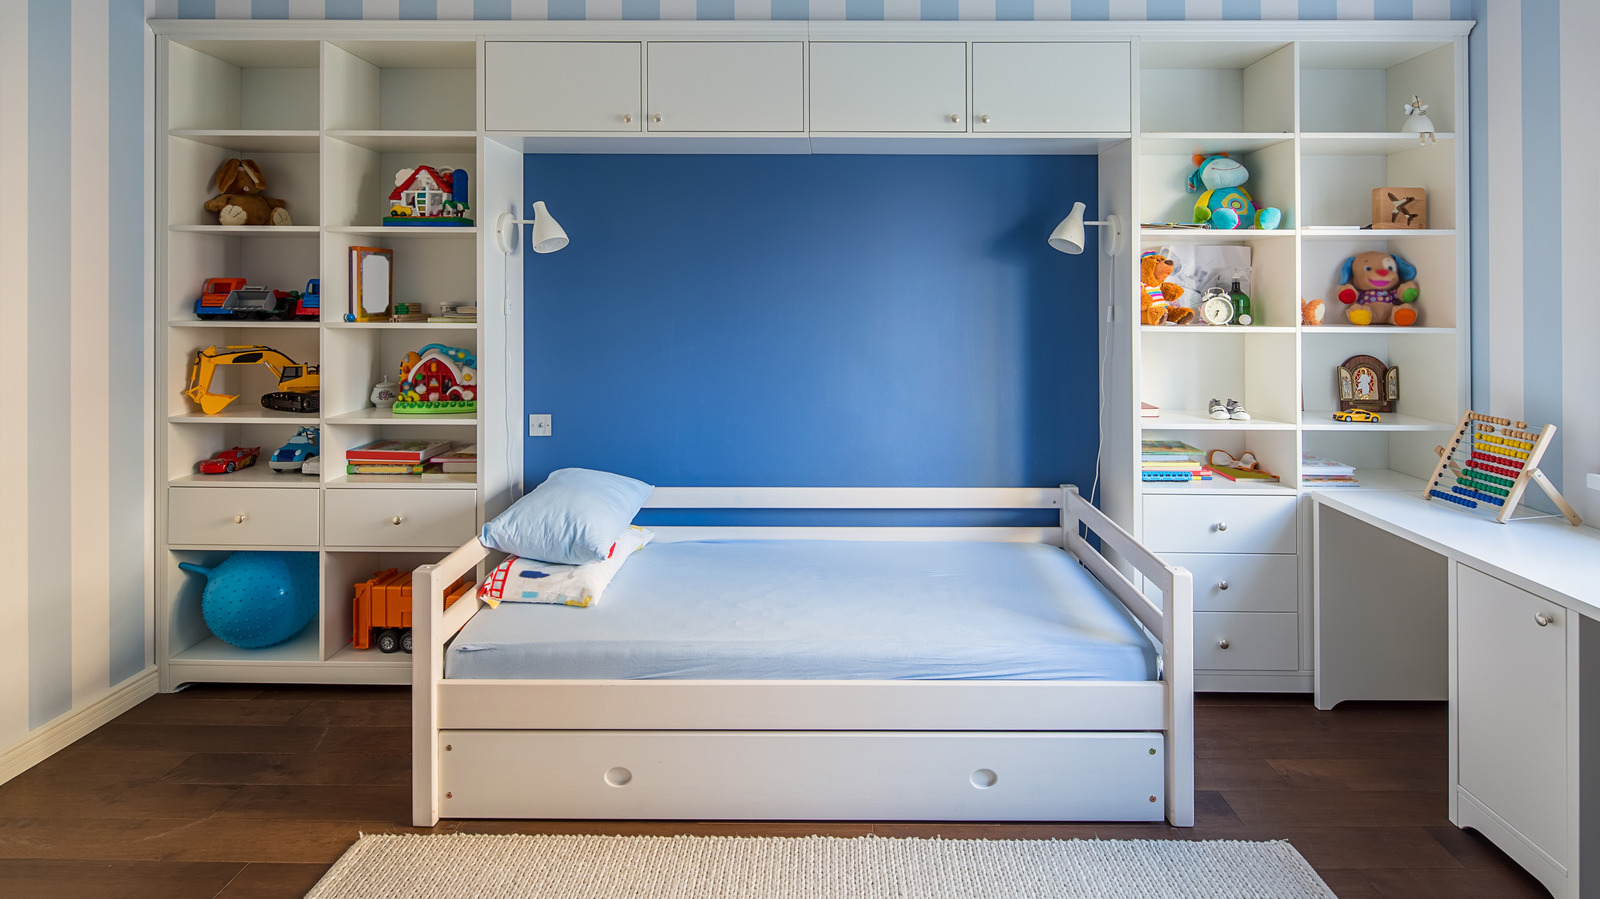 https://www.housedigest.com/img/gallery/30-ways-to-creatively-add-more-storage-space-in-your-kids-room/l-intro-1657283852.jpg